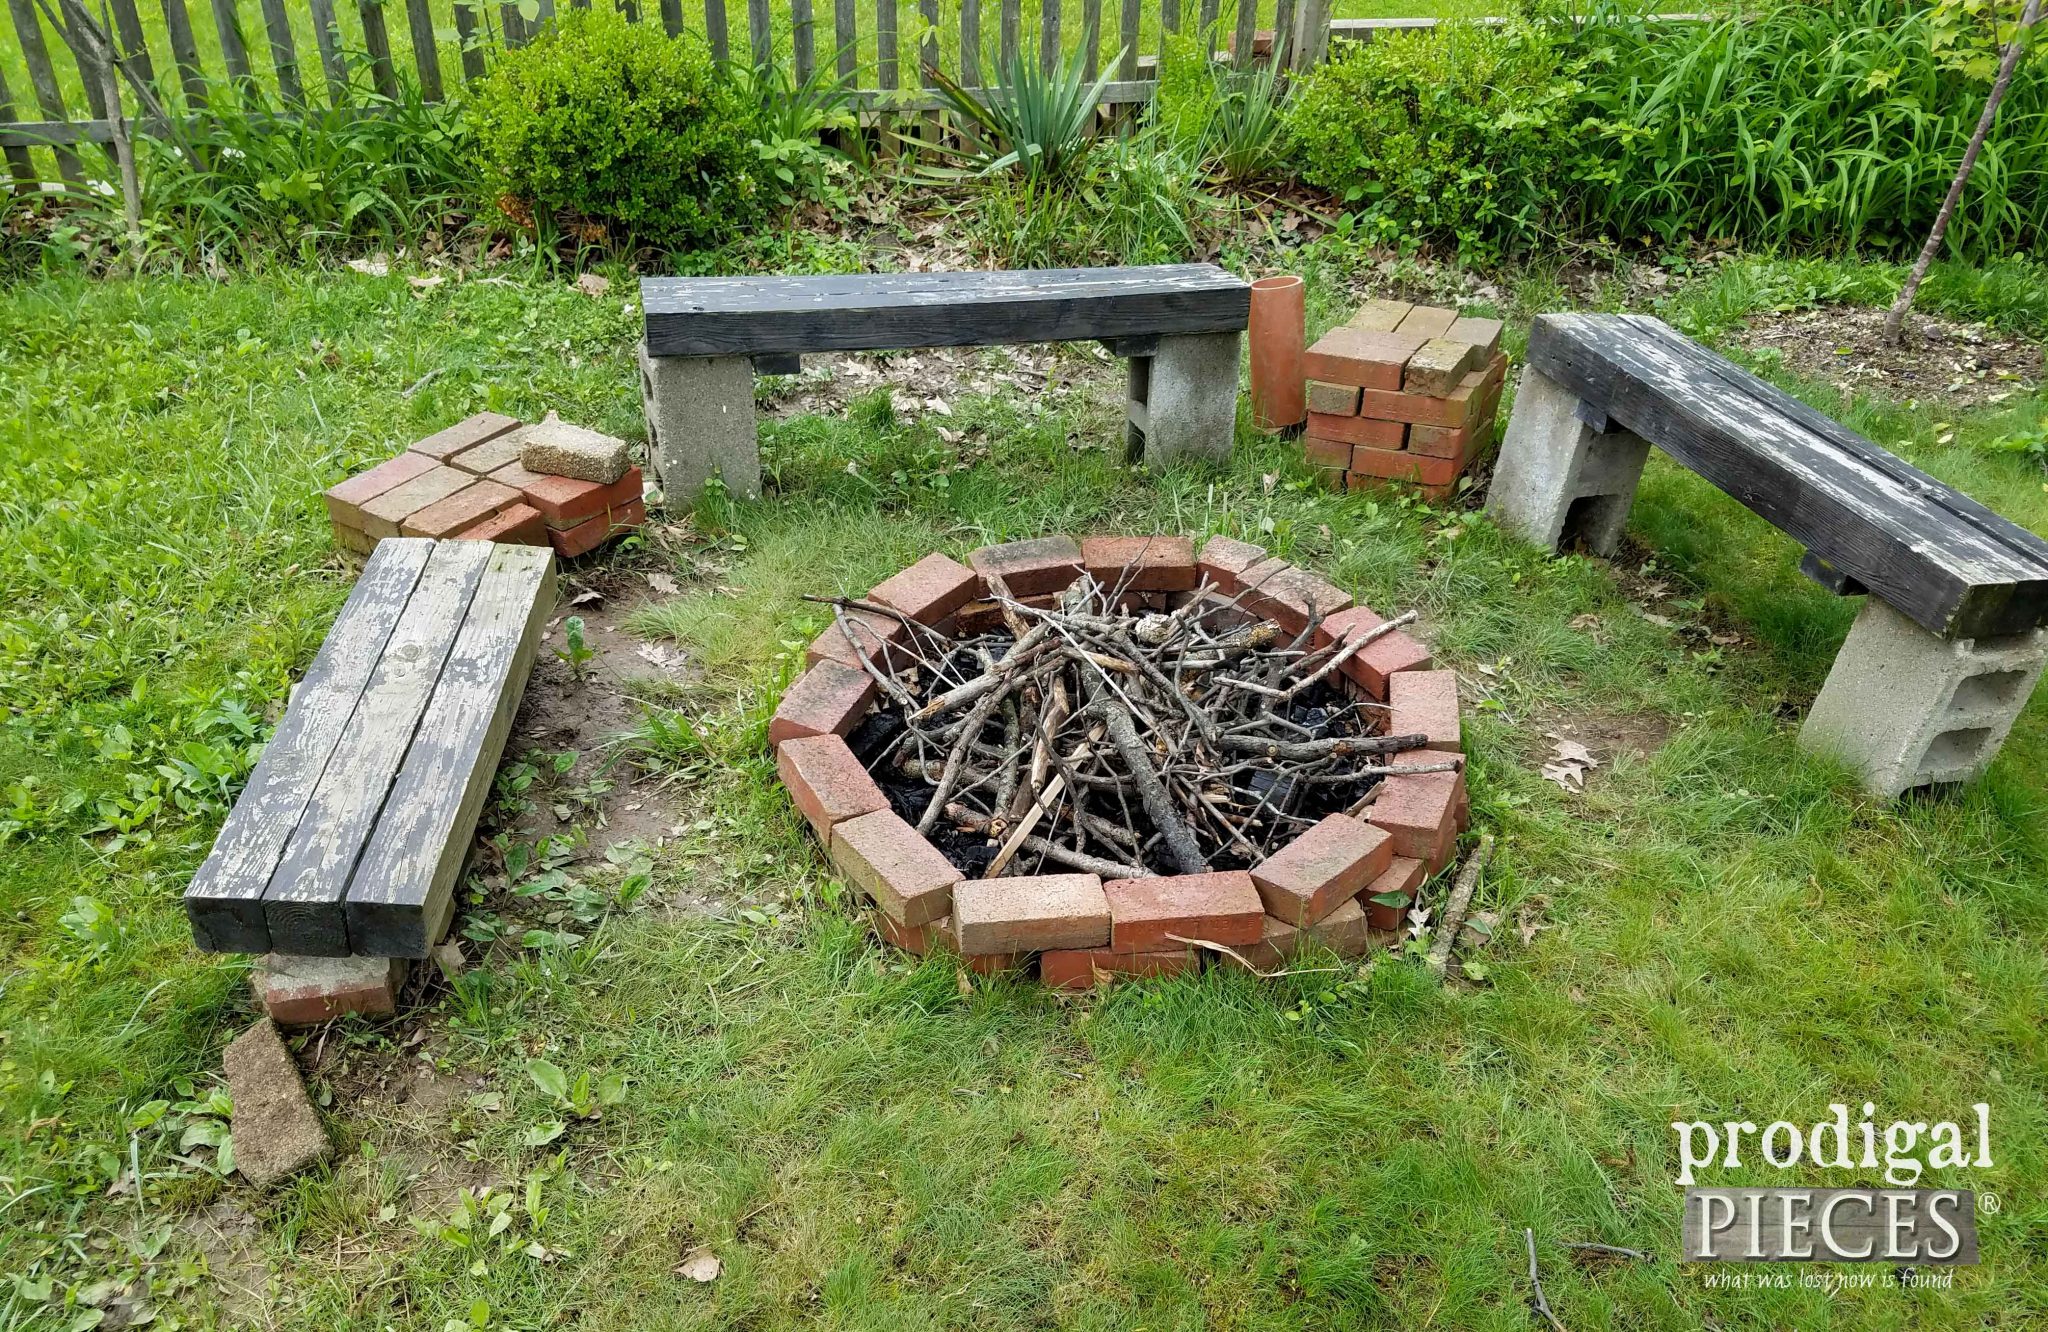 Top View of Messy Fire Pit | prodigalpieces.com